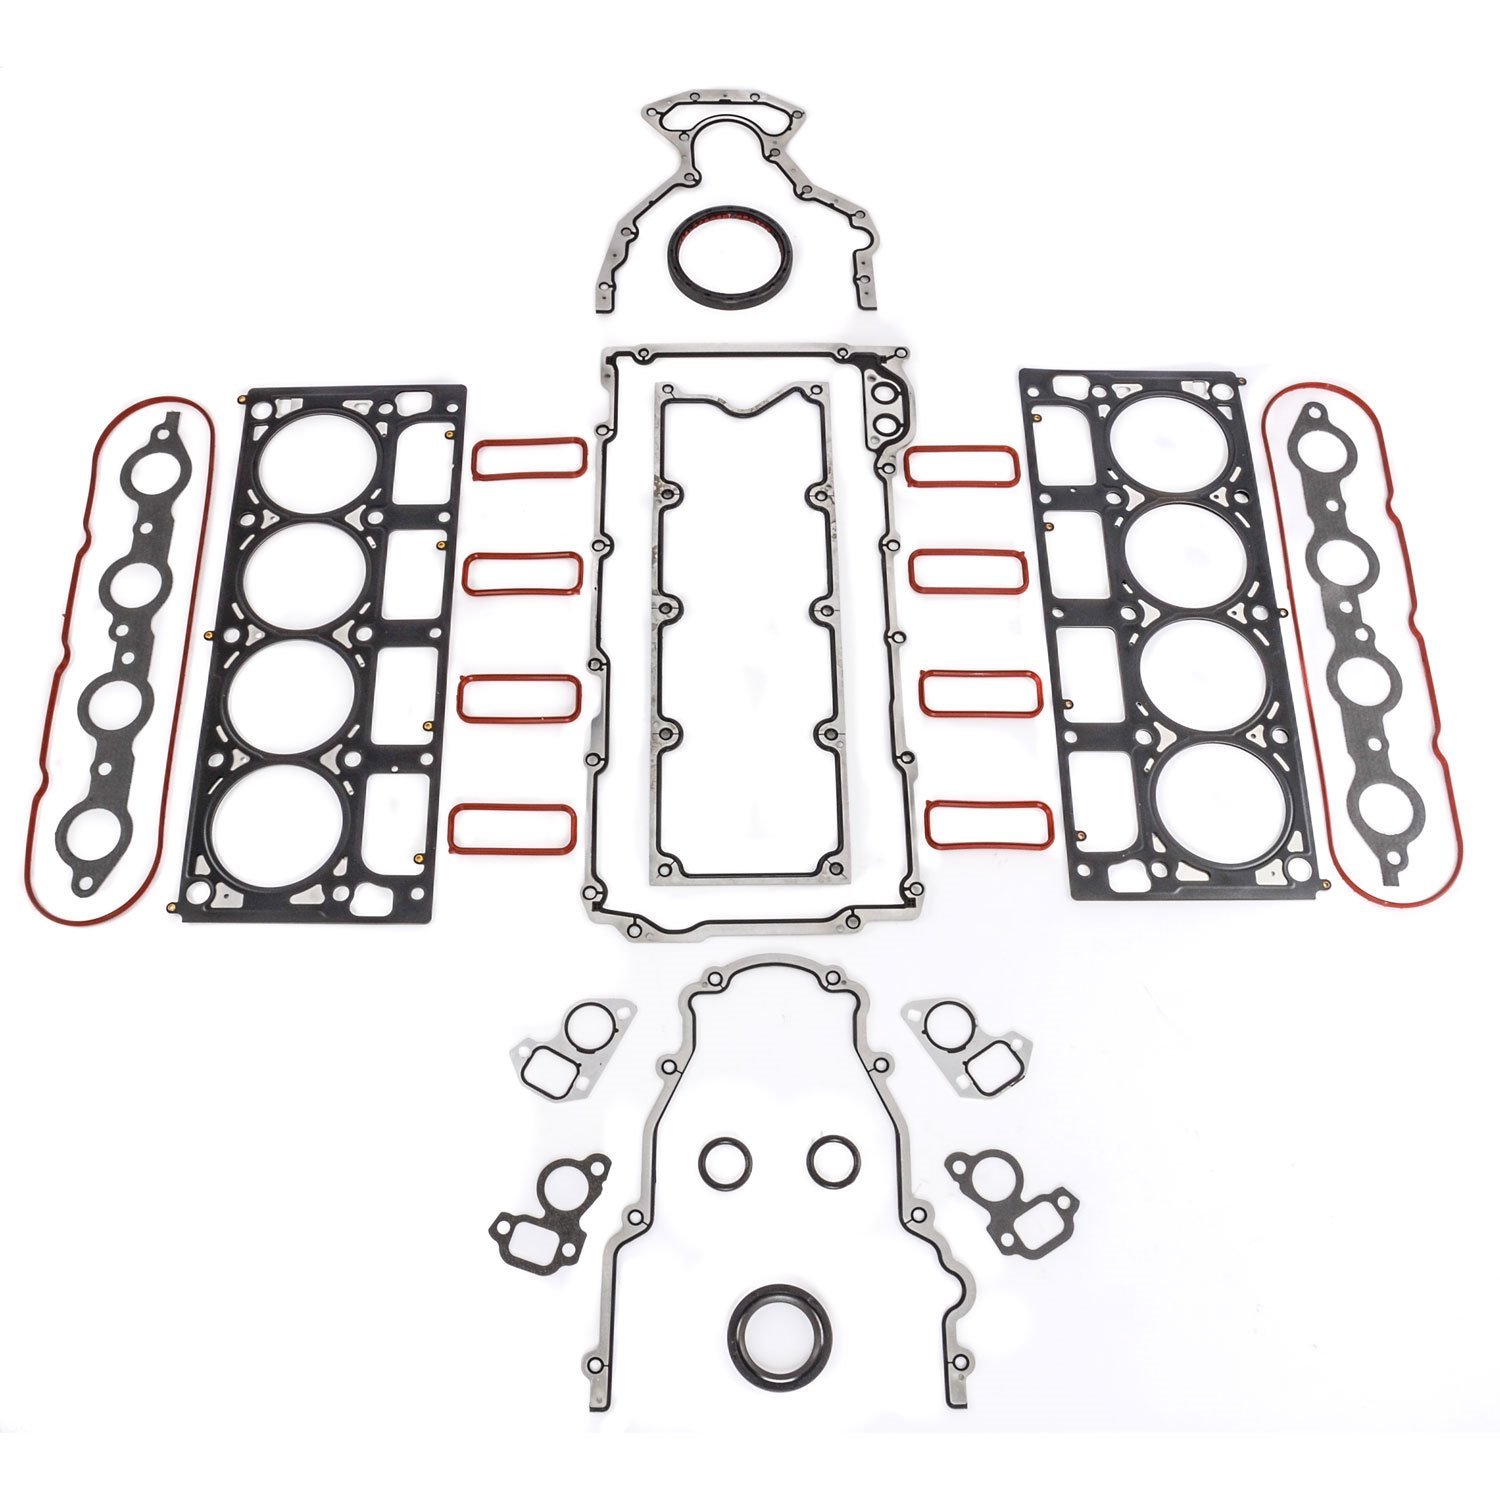 Gasket Kit Upper and Lower for GM LS1, LS2, and LS6 Engines